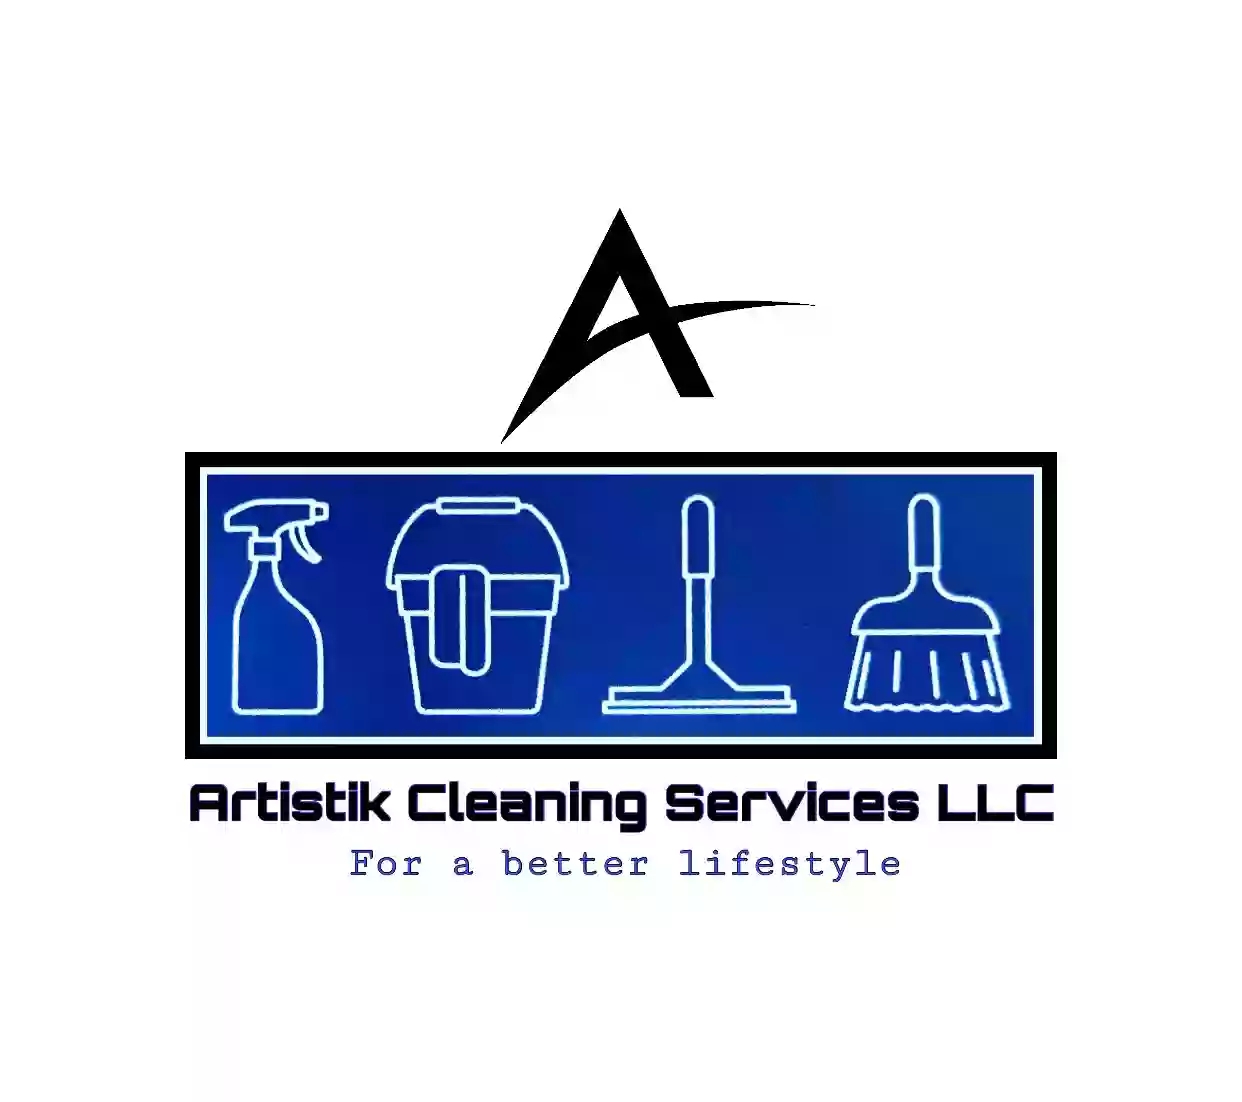 Artistik Cleaning Services LLC